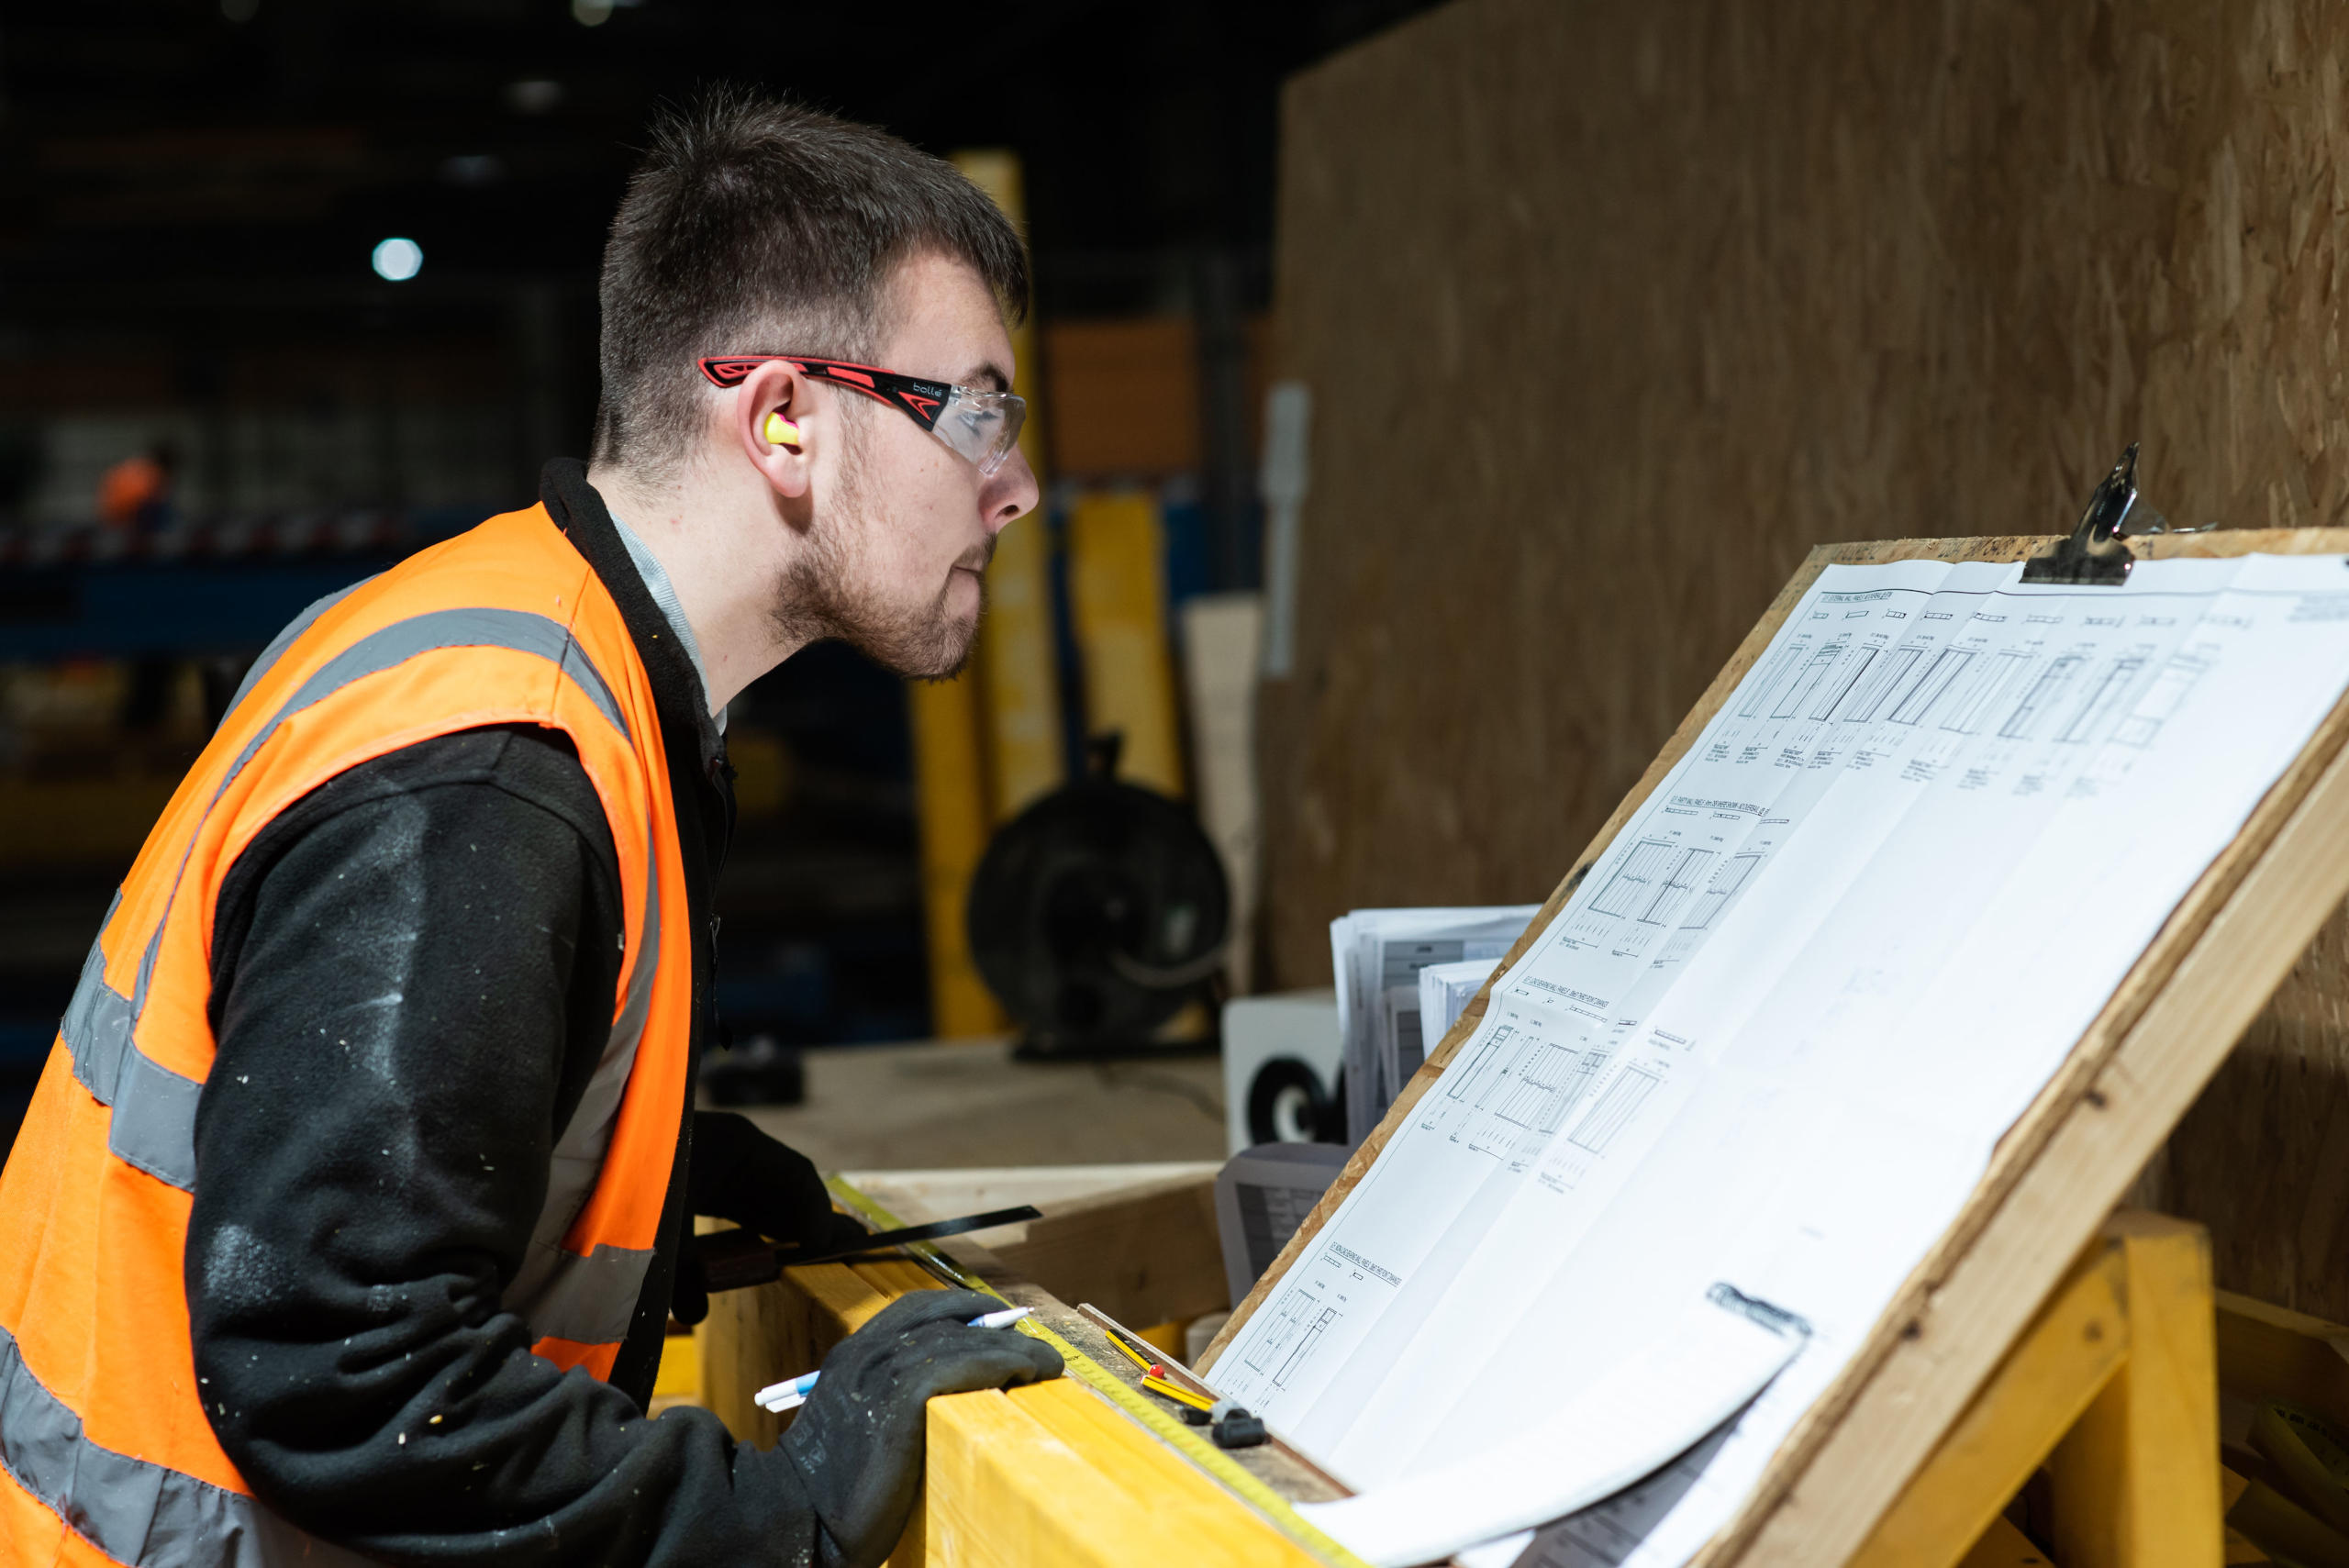 A Donaldson Timber System's employee checking truss plans before marking his wood product for manufacture